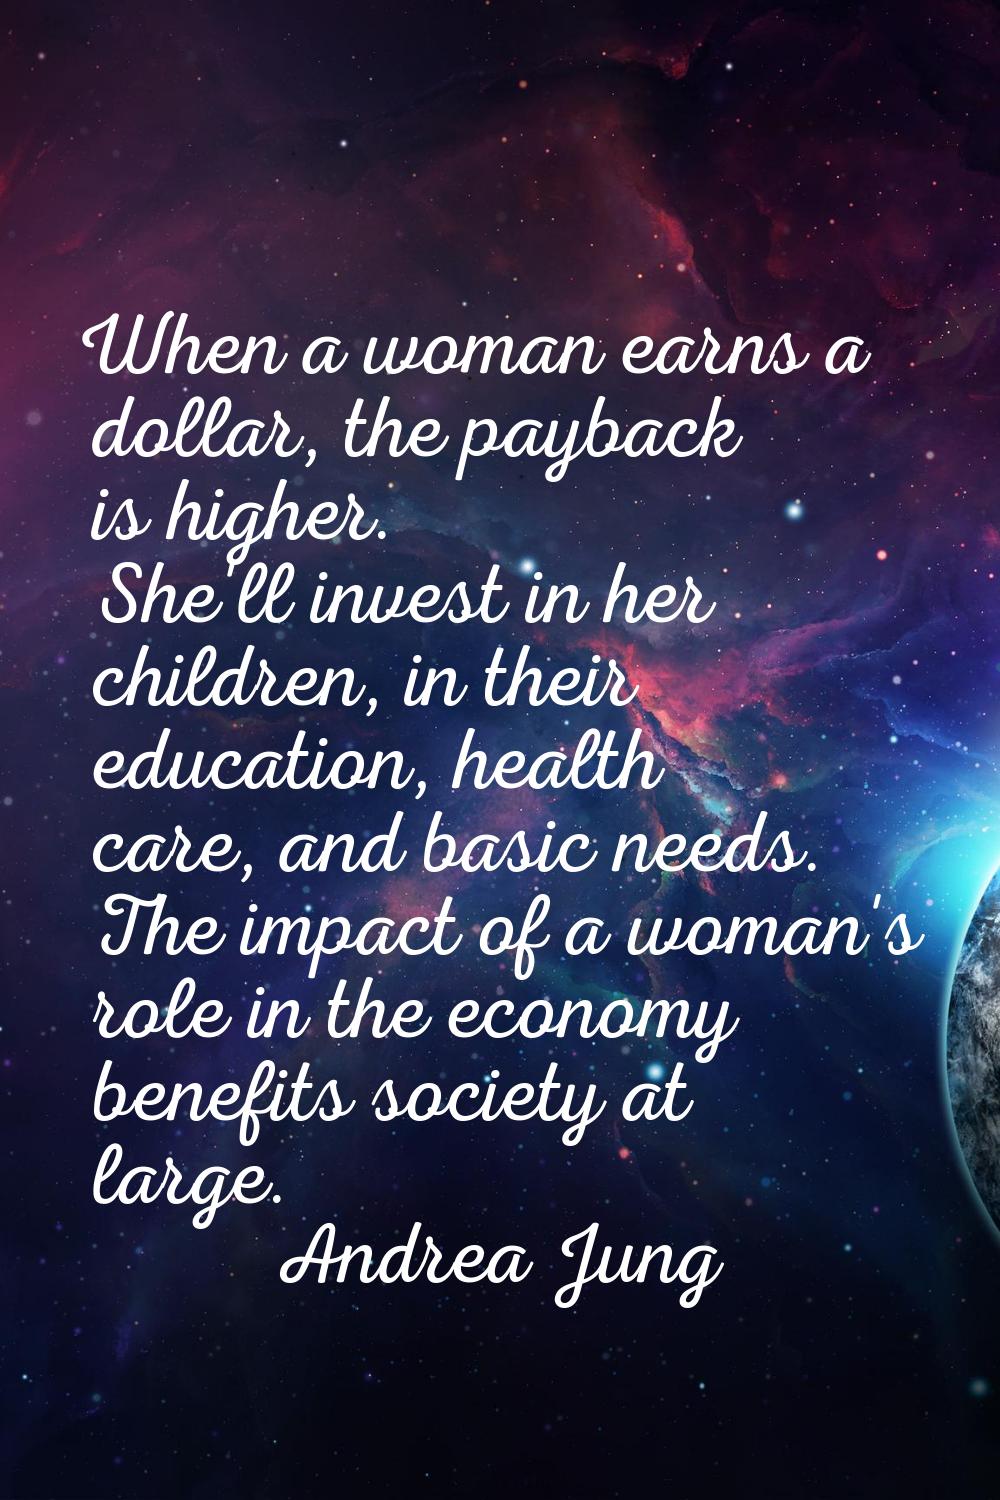 When a woman earns a dollar, the payback is higher. She'll invest in her children, in their educati